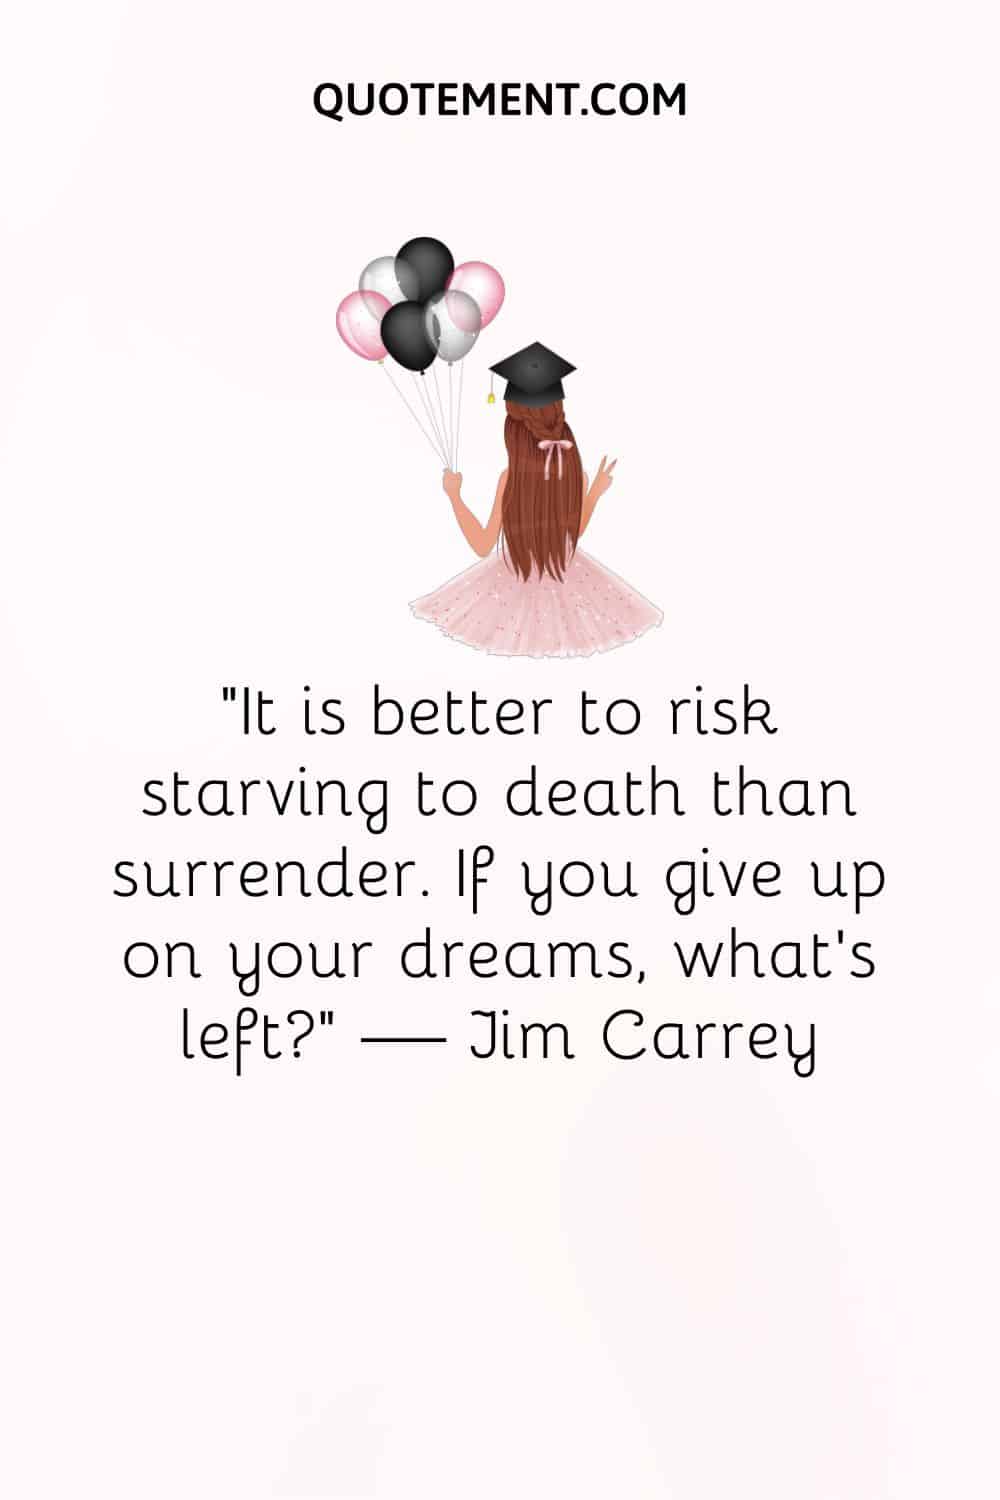 “It is better to risk starving to death than surrender. If you give up on your dreams, what’s left” — Jim Carrey